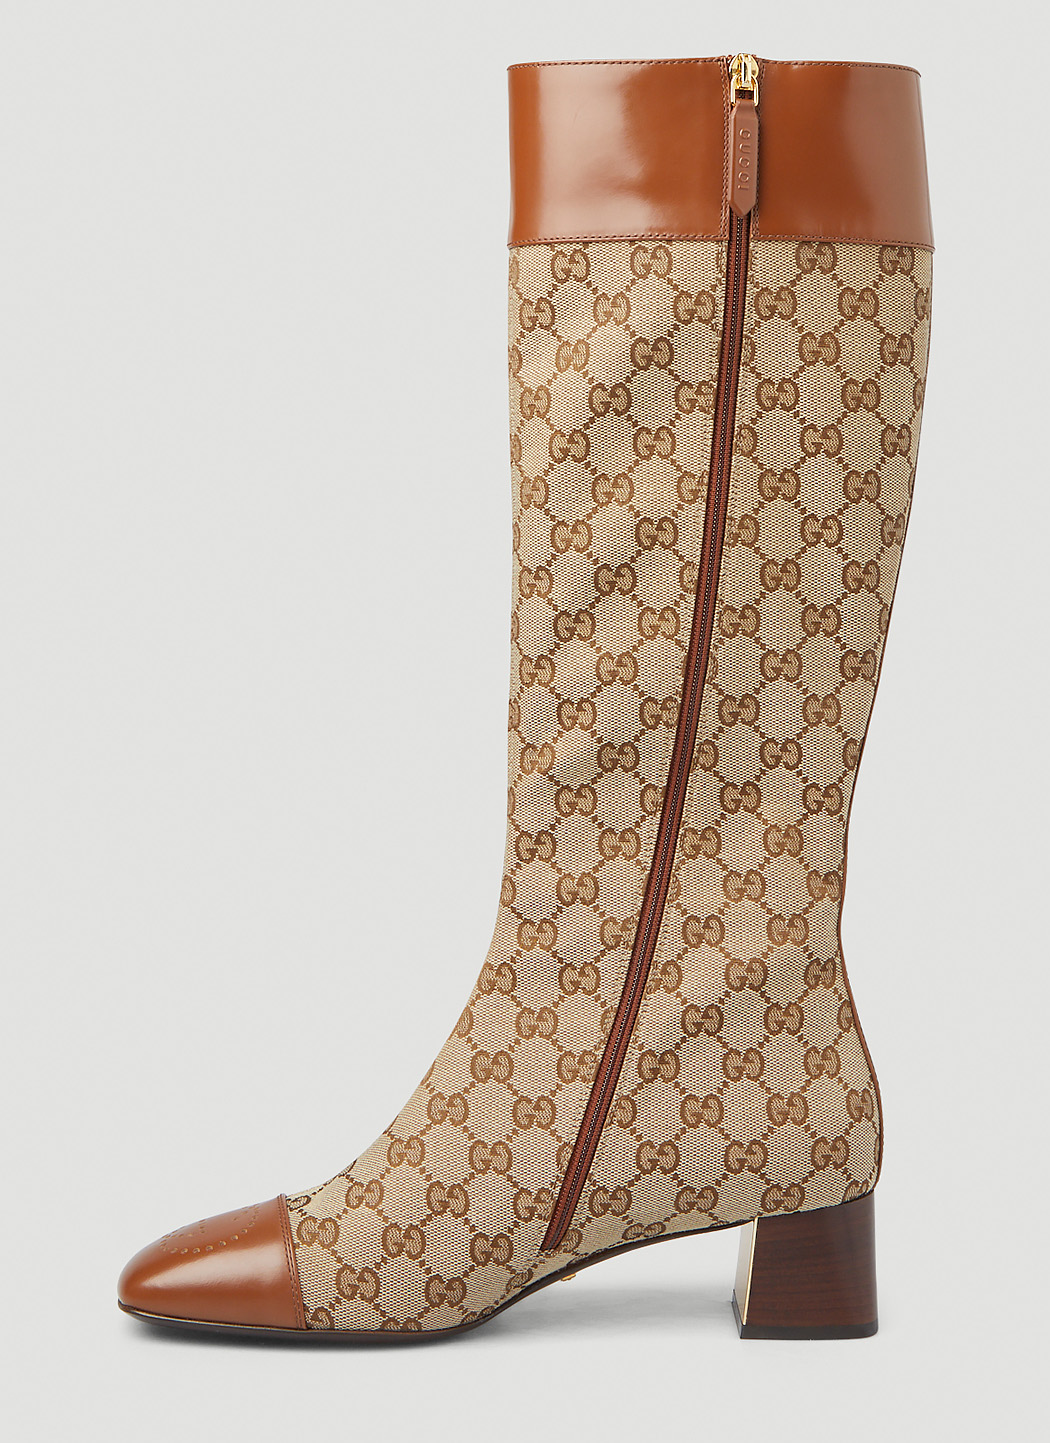 GUCCI Stanley embellished rubber rain boots